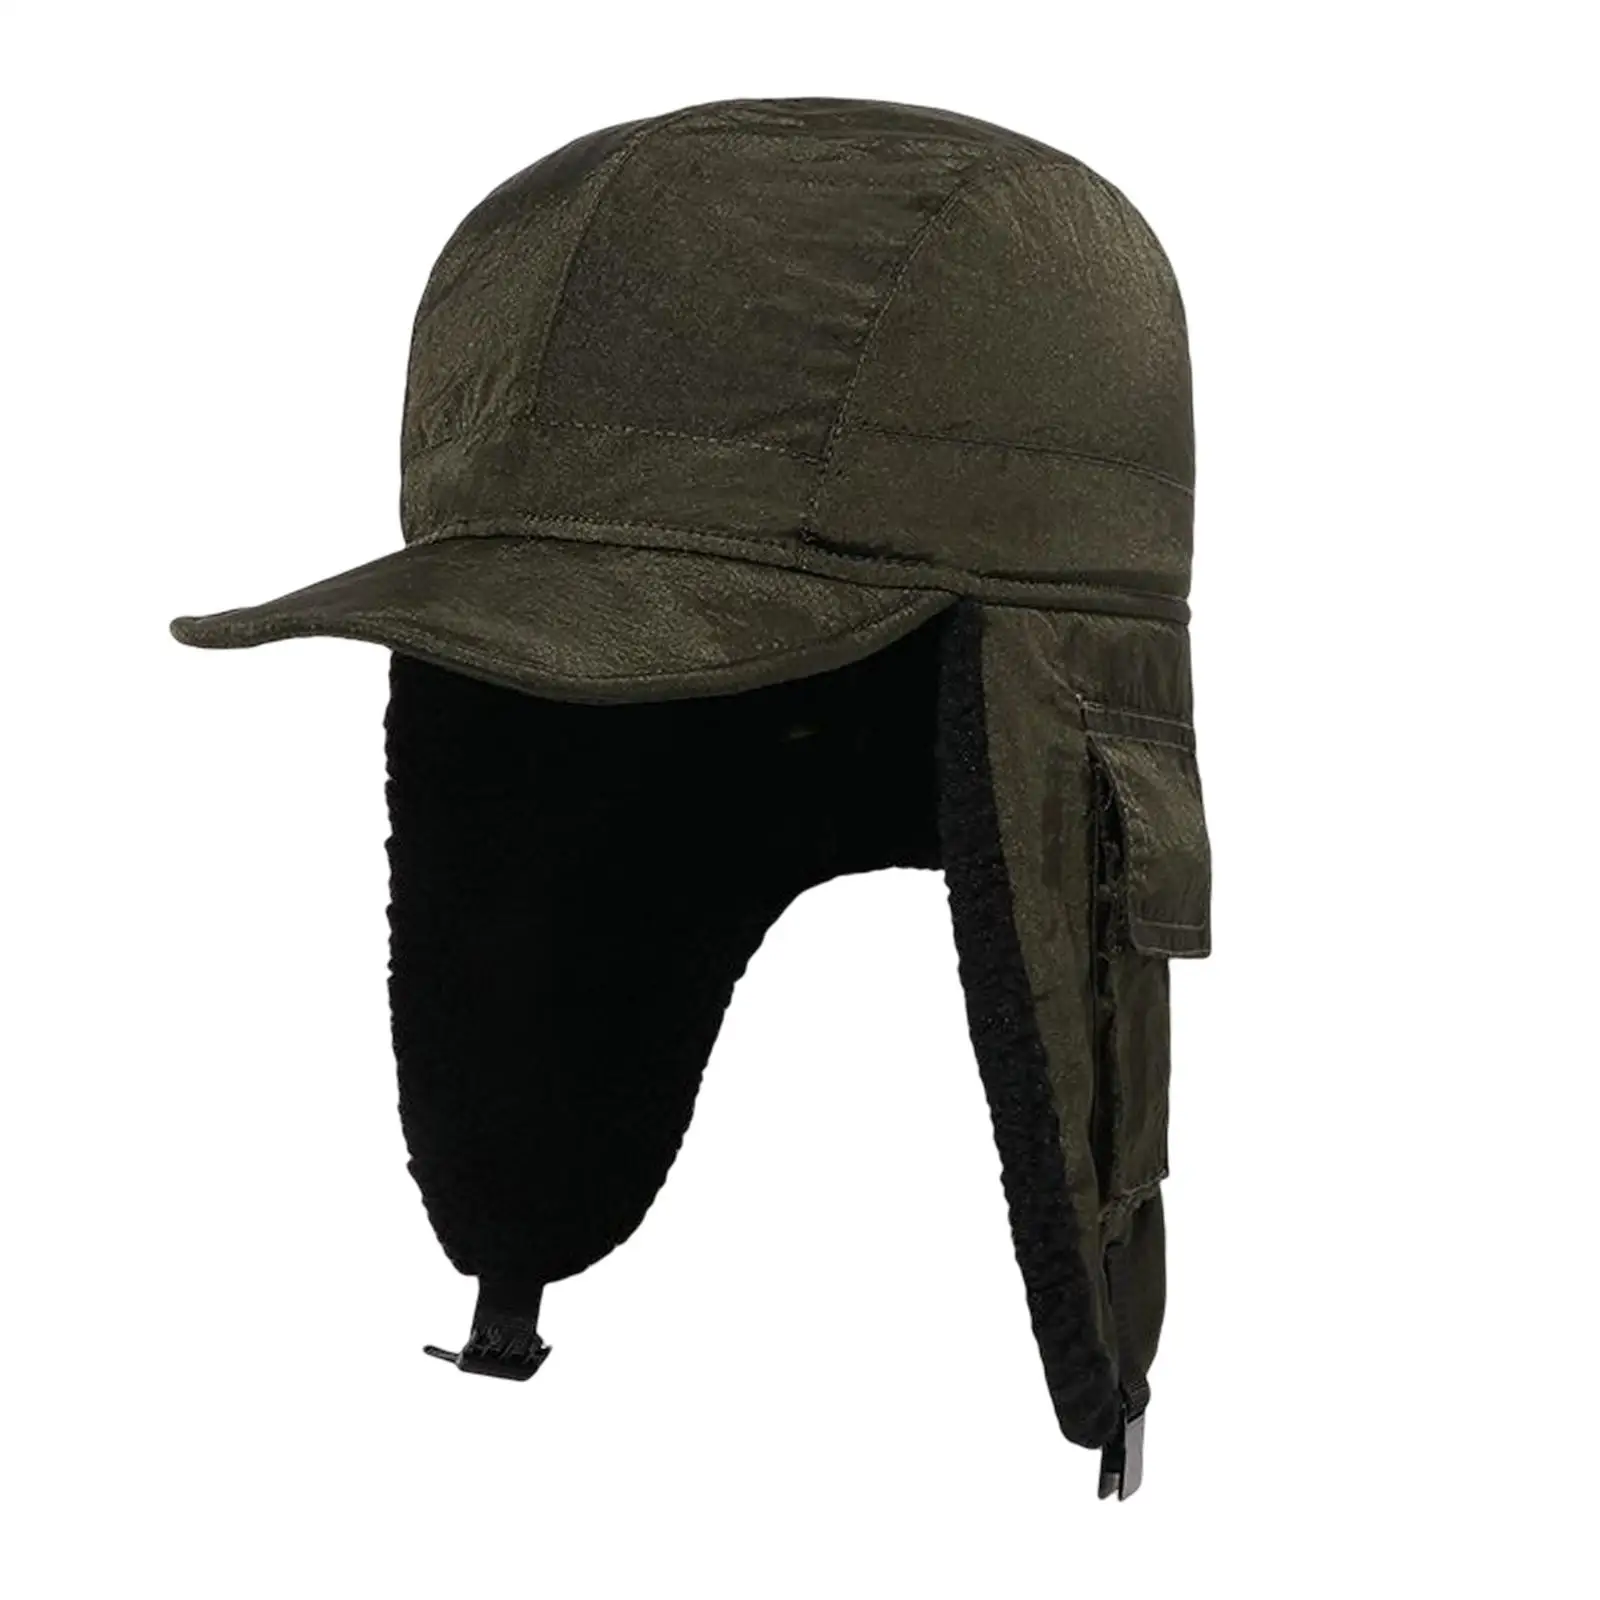 Winter Cap Men Women Windproof Baseball Hat with Ear Flaps for Climbing Hunting Motorcycle